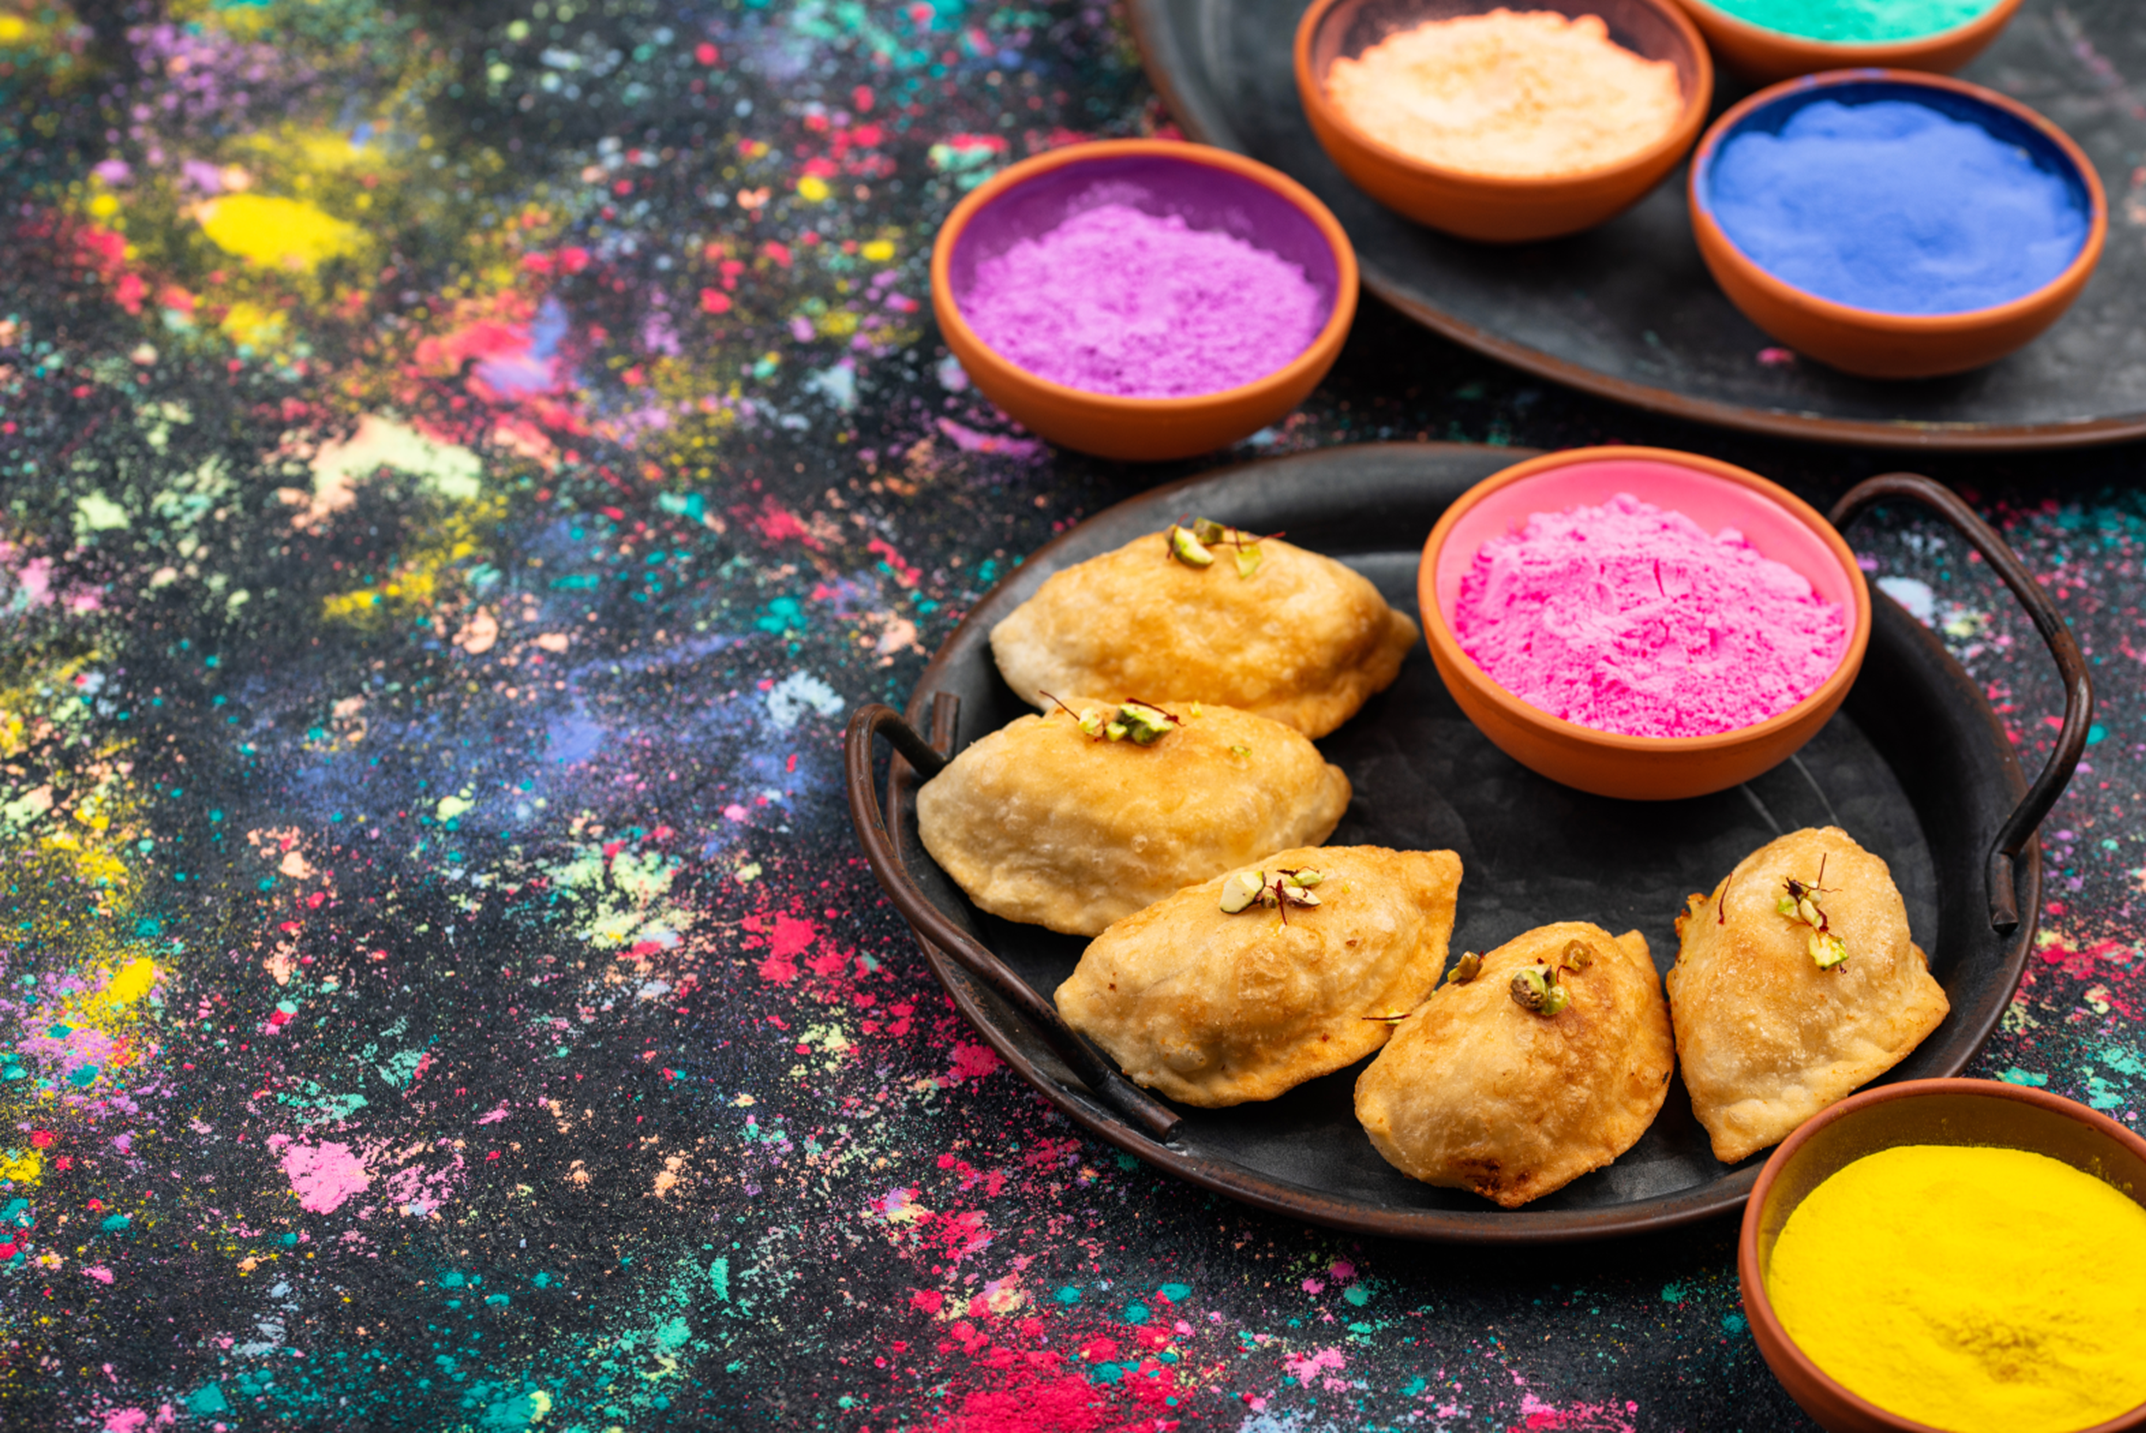 A picture of Gujiya on a plate with red, yellow, blue, and purple bowls of colored powder.